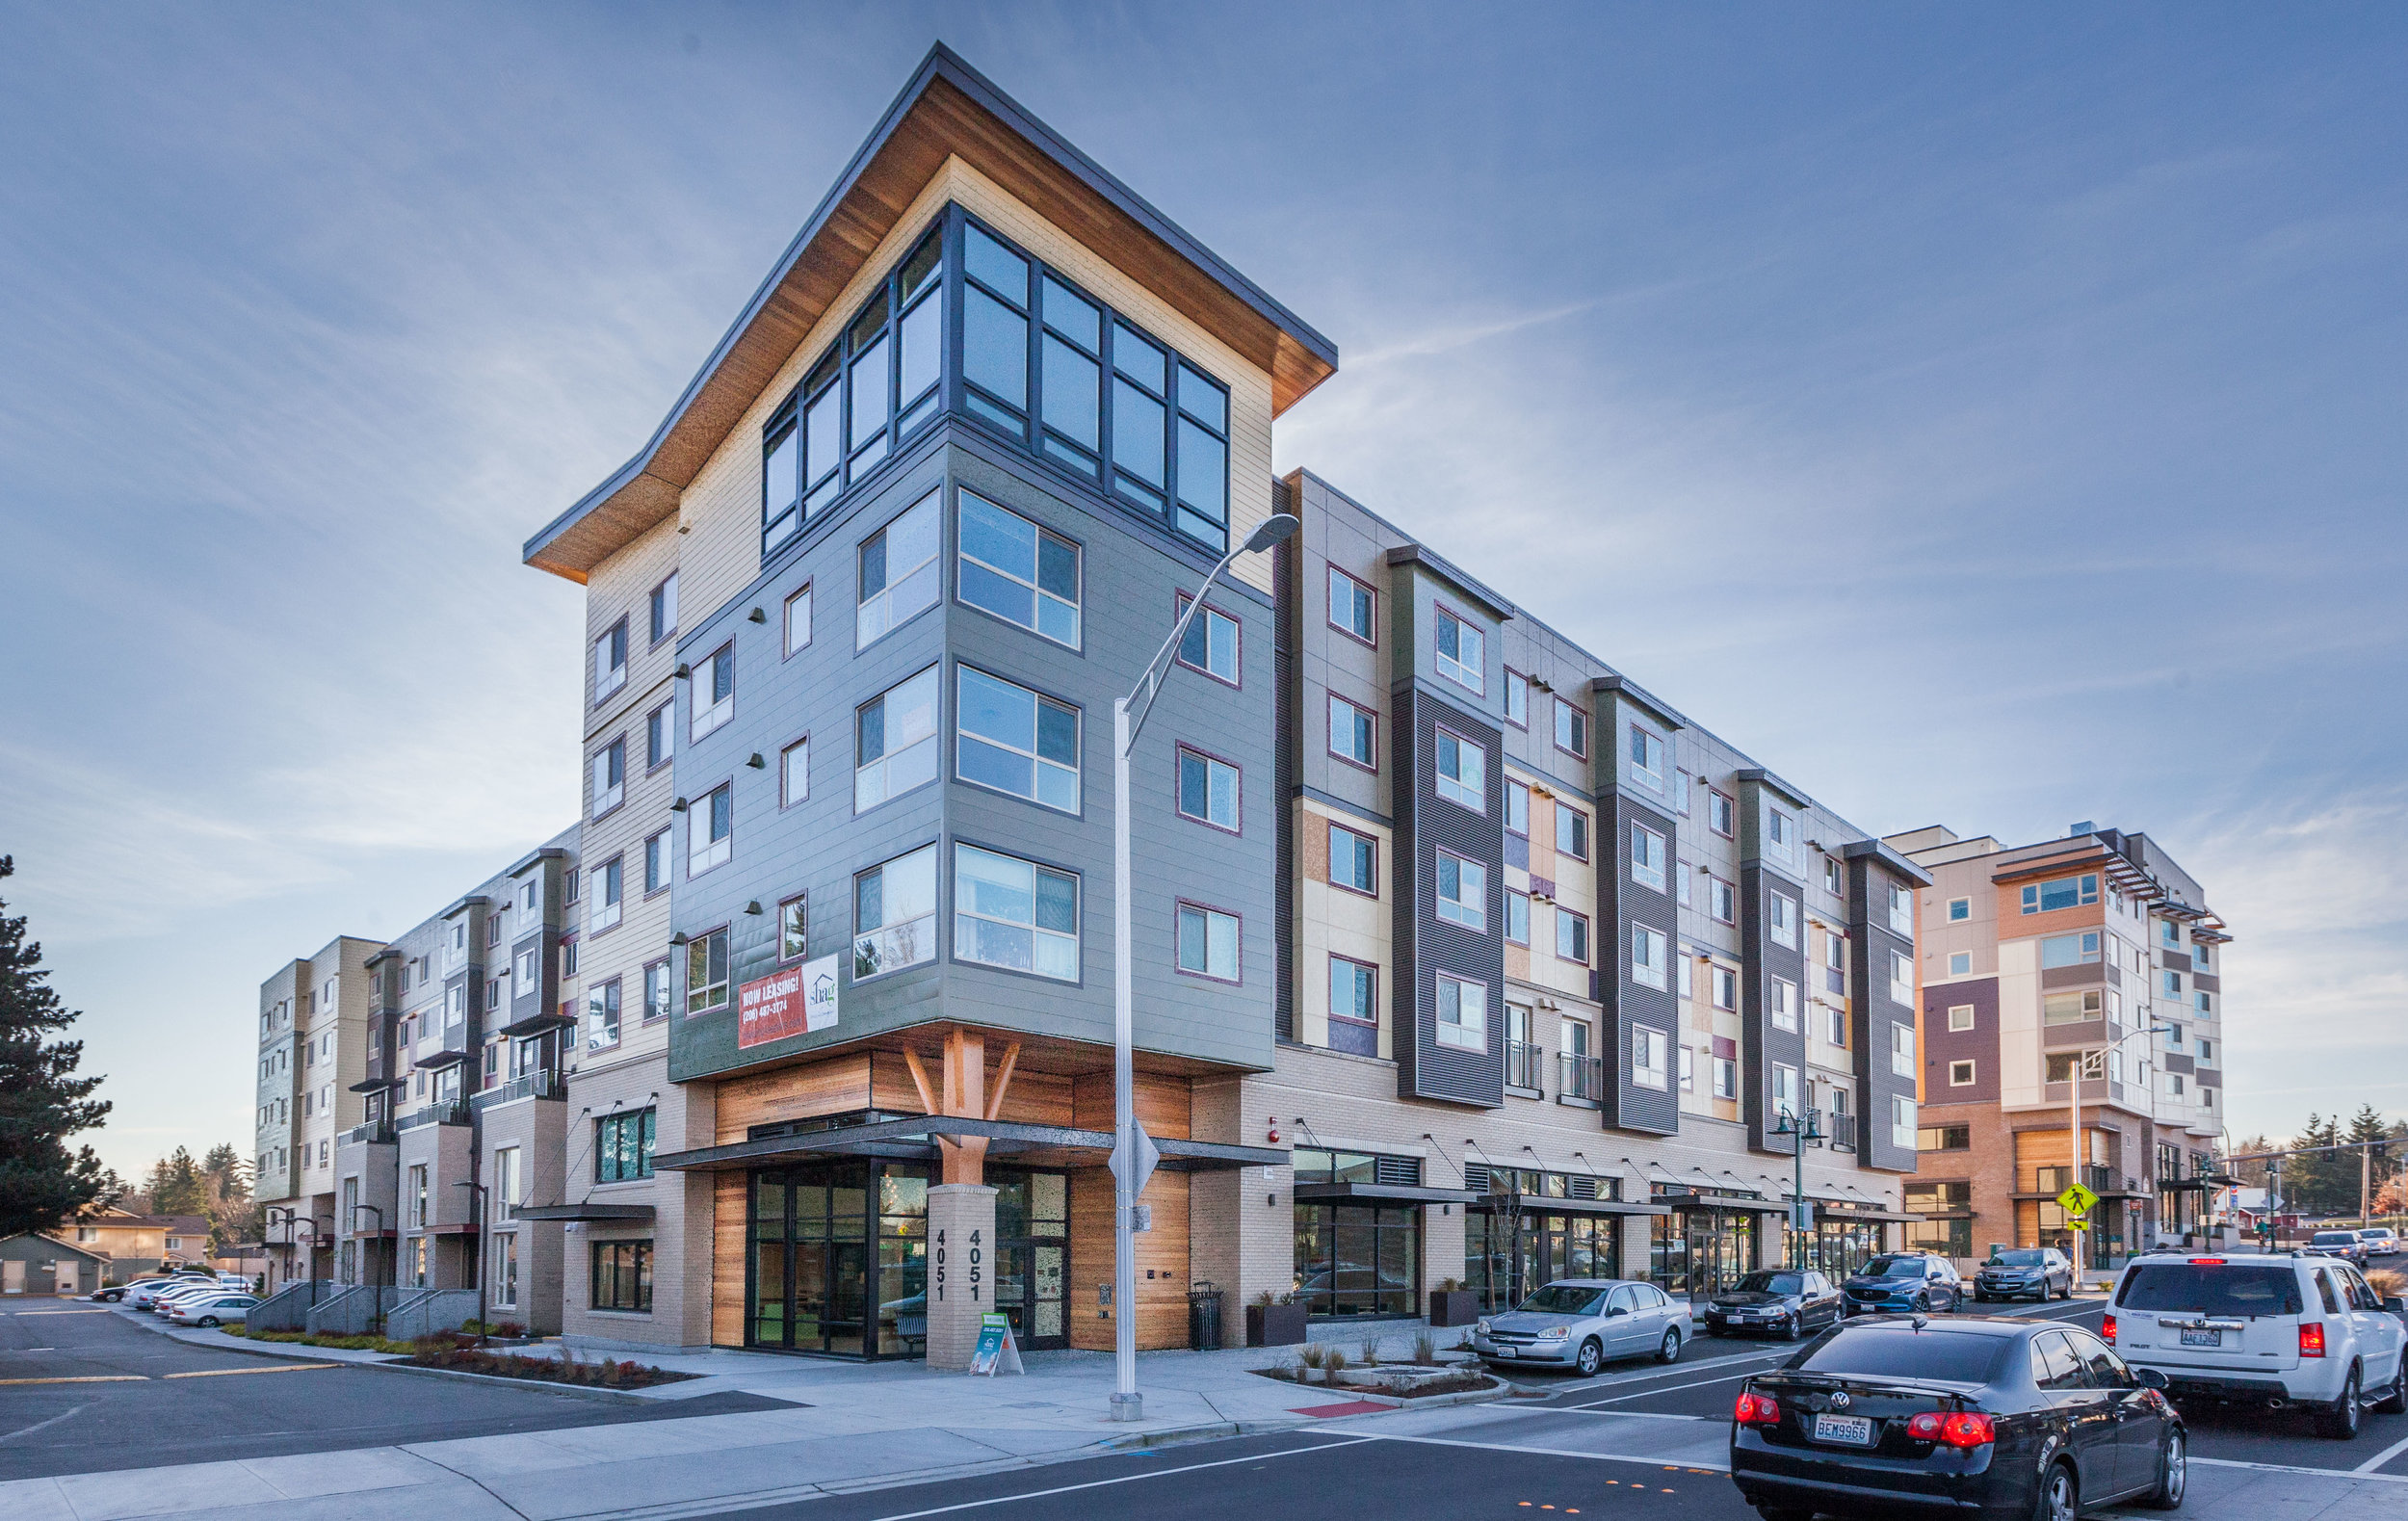 Architectural Photography By R.E Rocket Media For Vengryn Exteriors- Federal Way Washington 